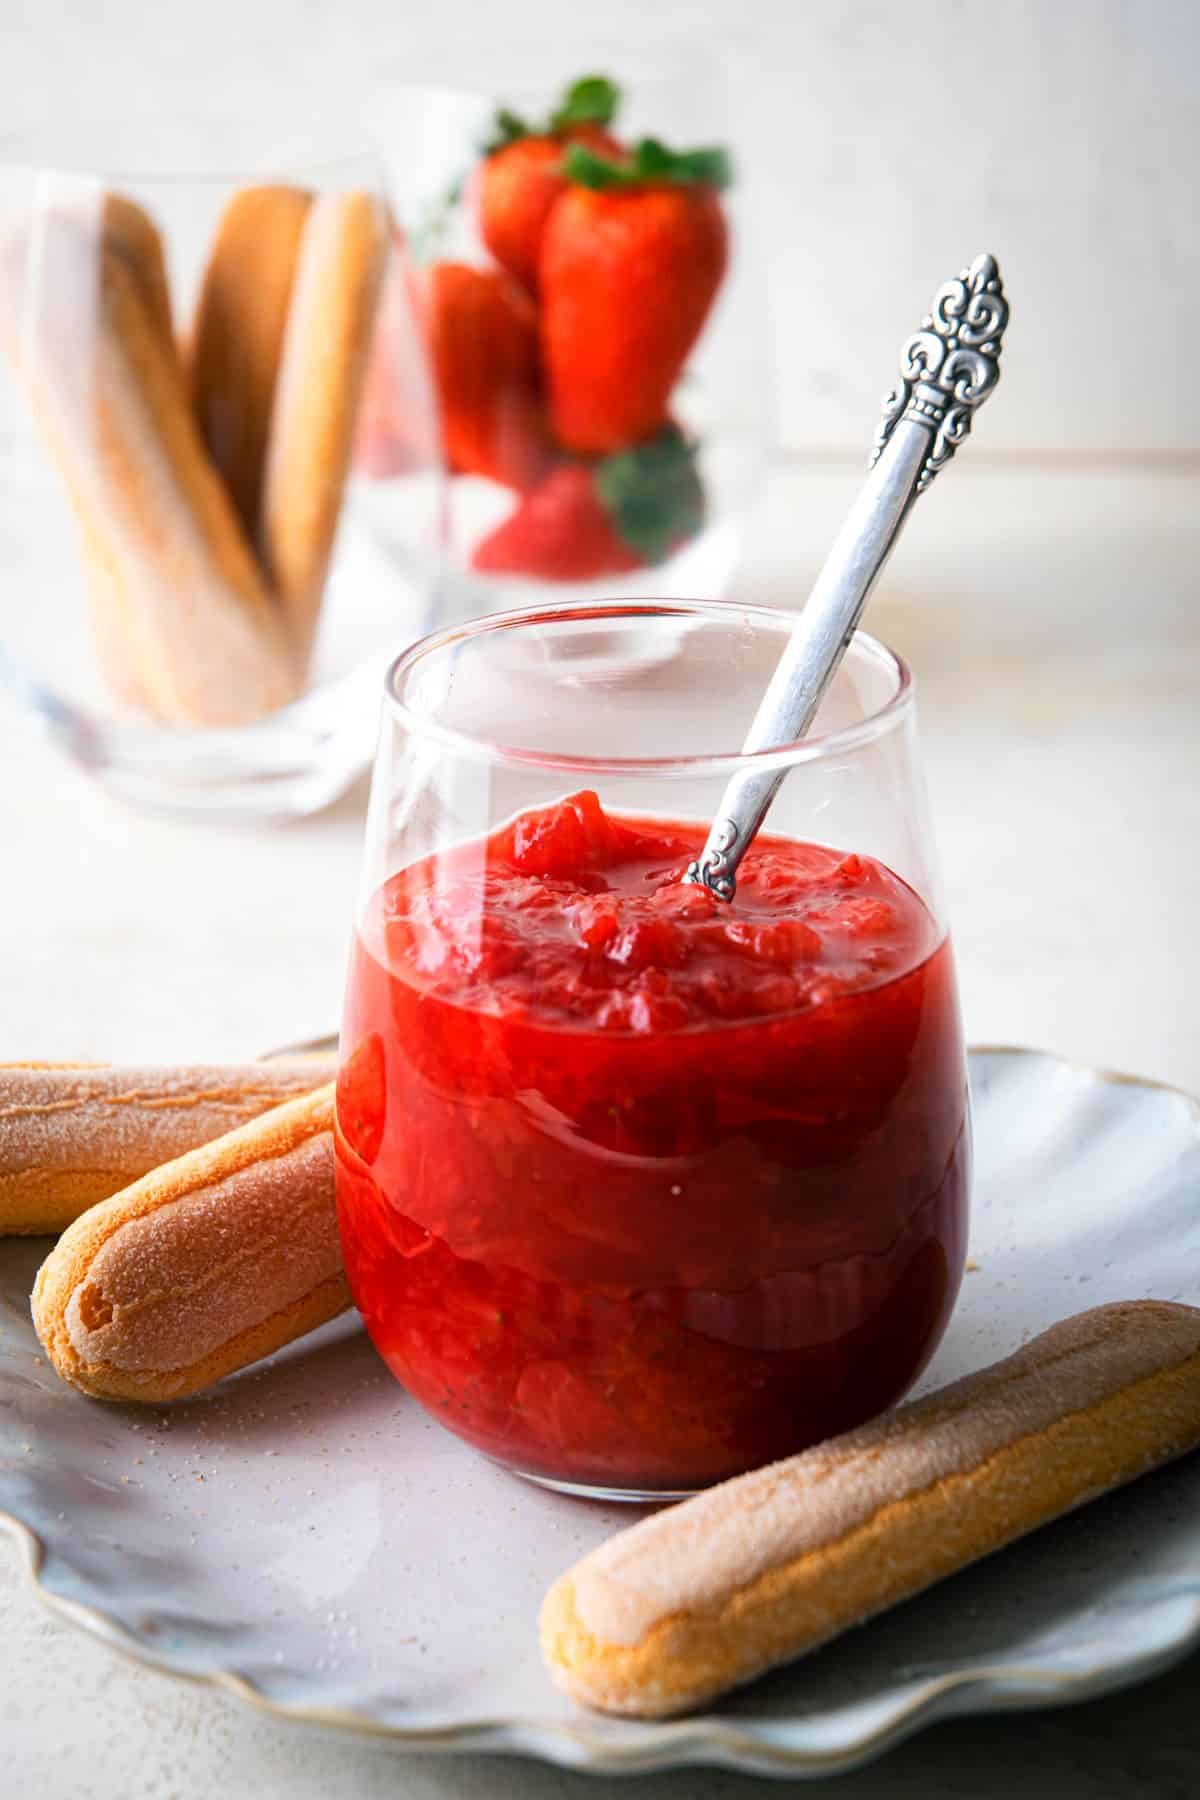 Strawberry-rhubarb sauce in a glass with a spoon and biscuits on the side.